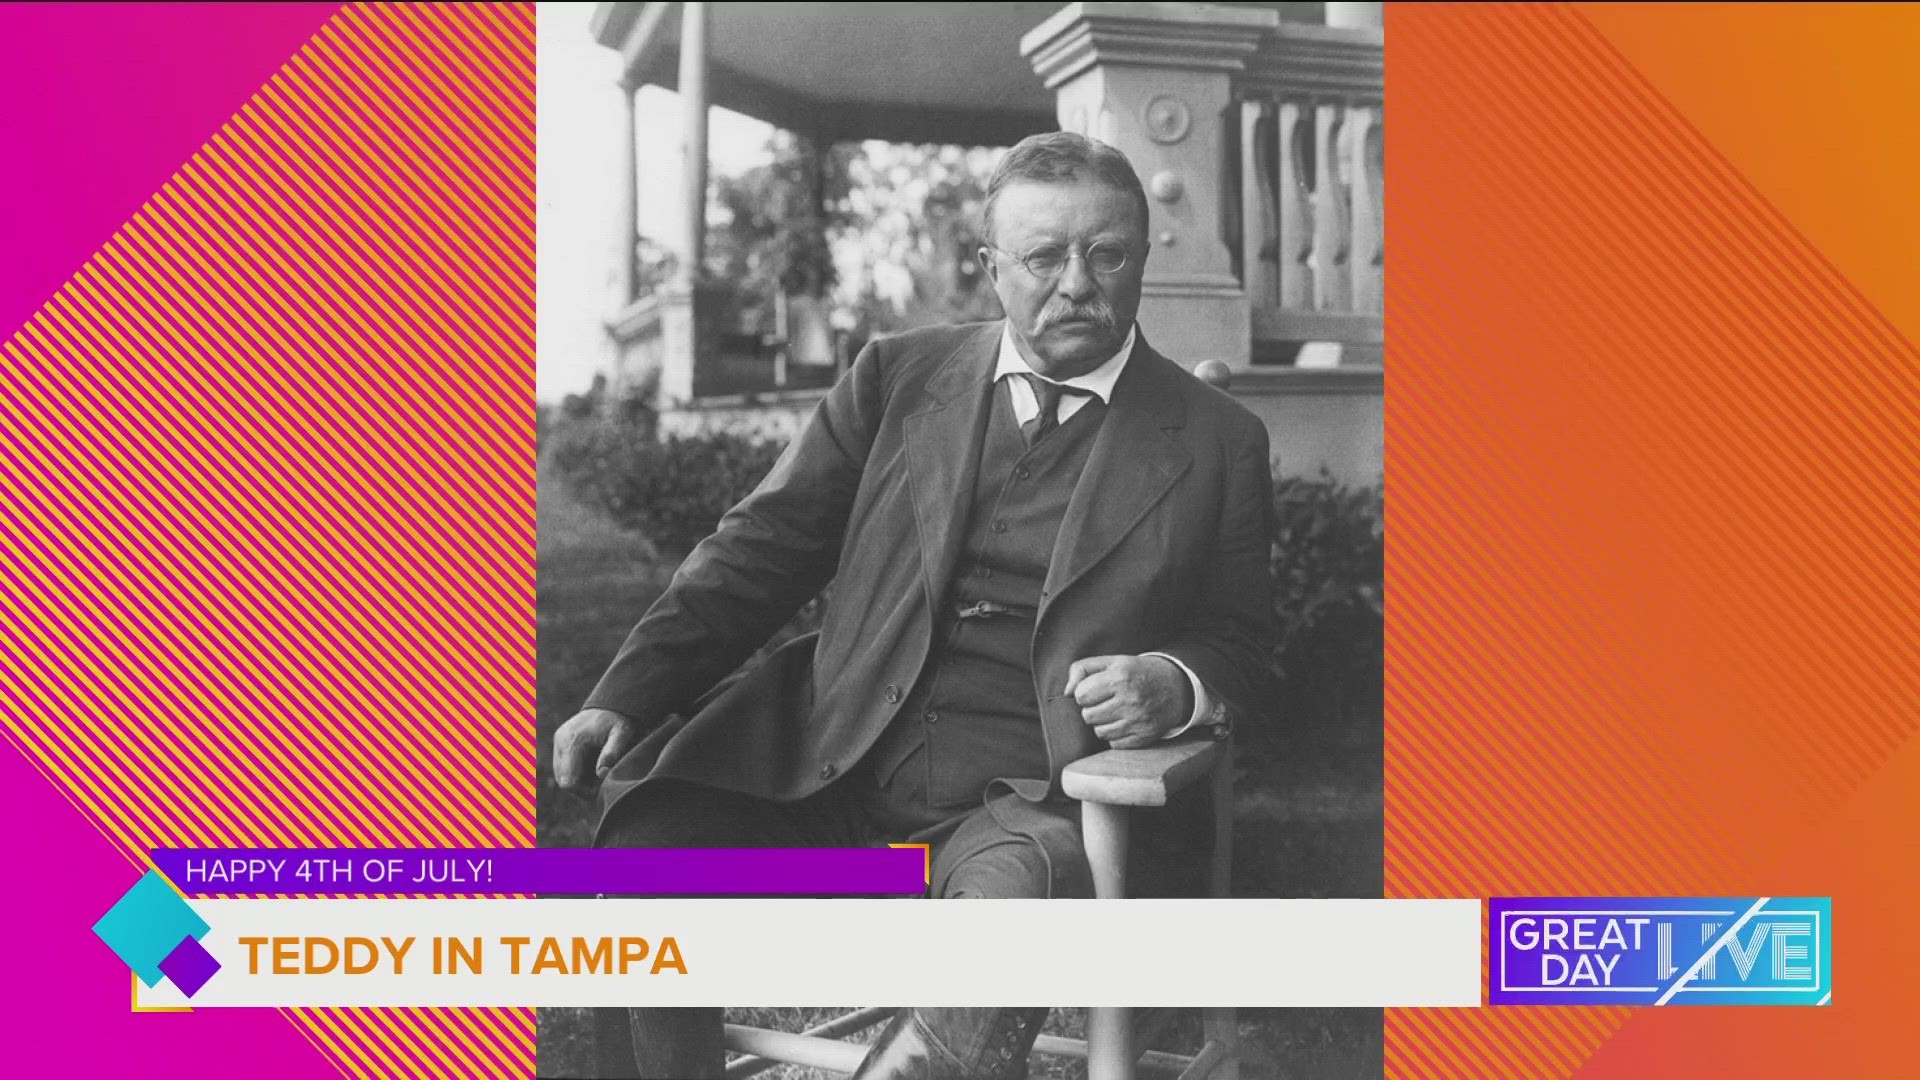 Dan Carpenter from the Henry B. Plant museum joined GDL to give us a history lesson on Teddy Roosevelt's time in Tampa.